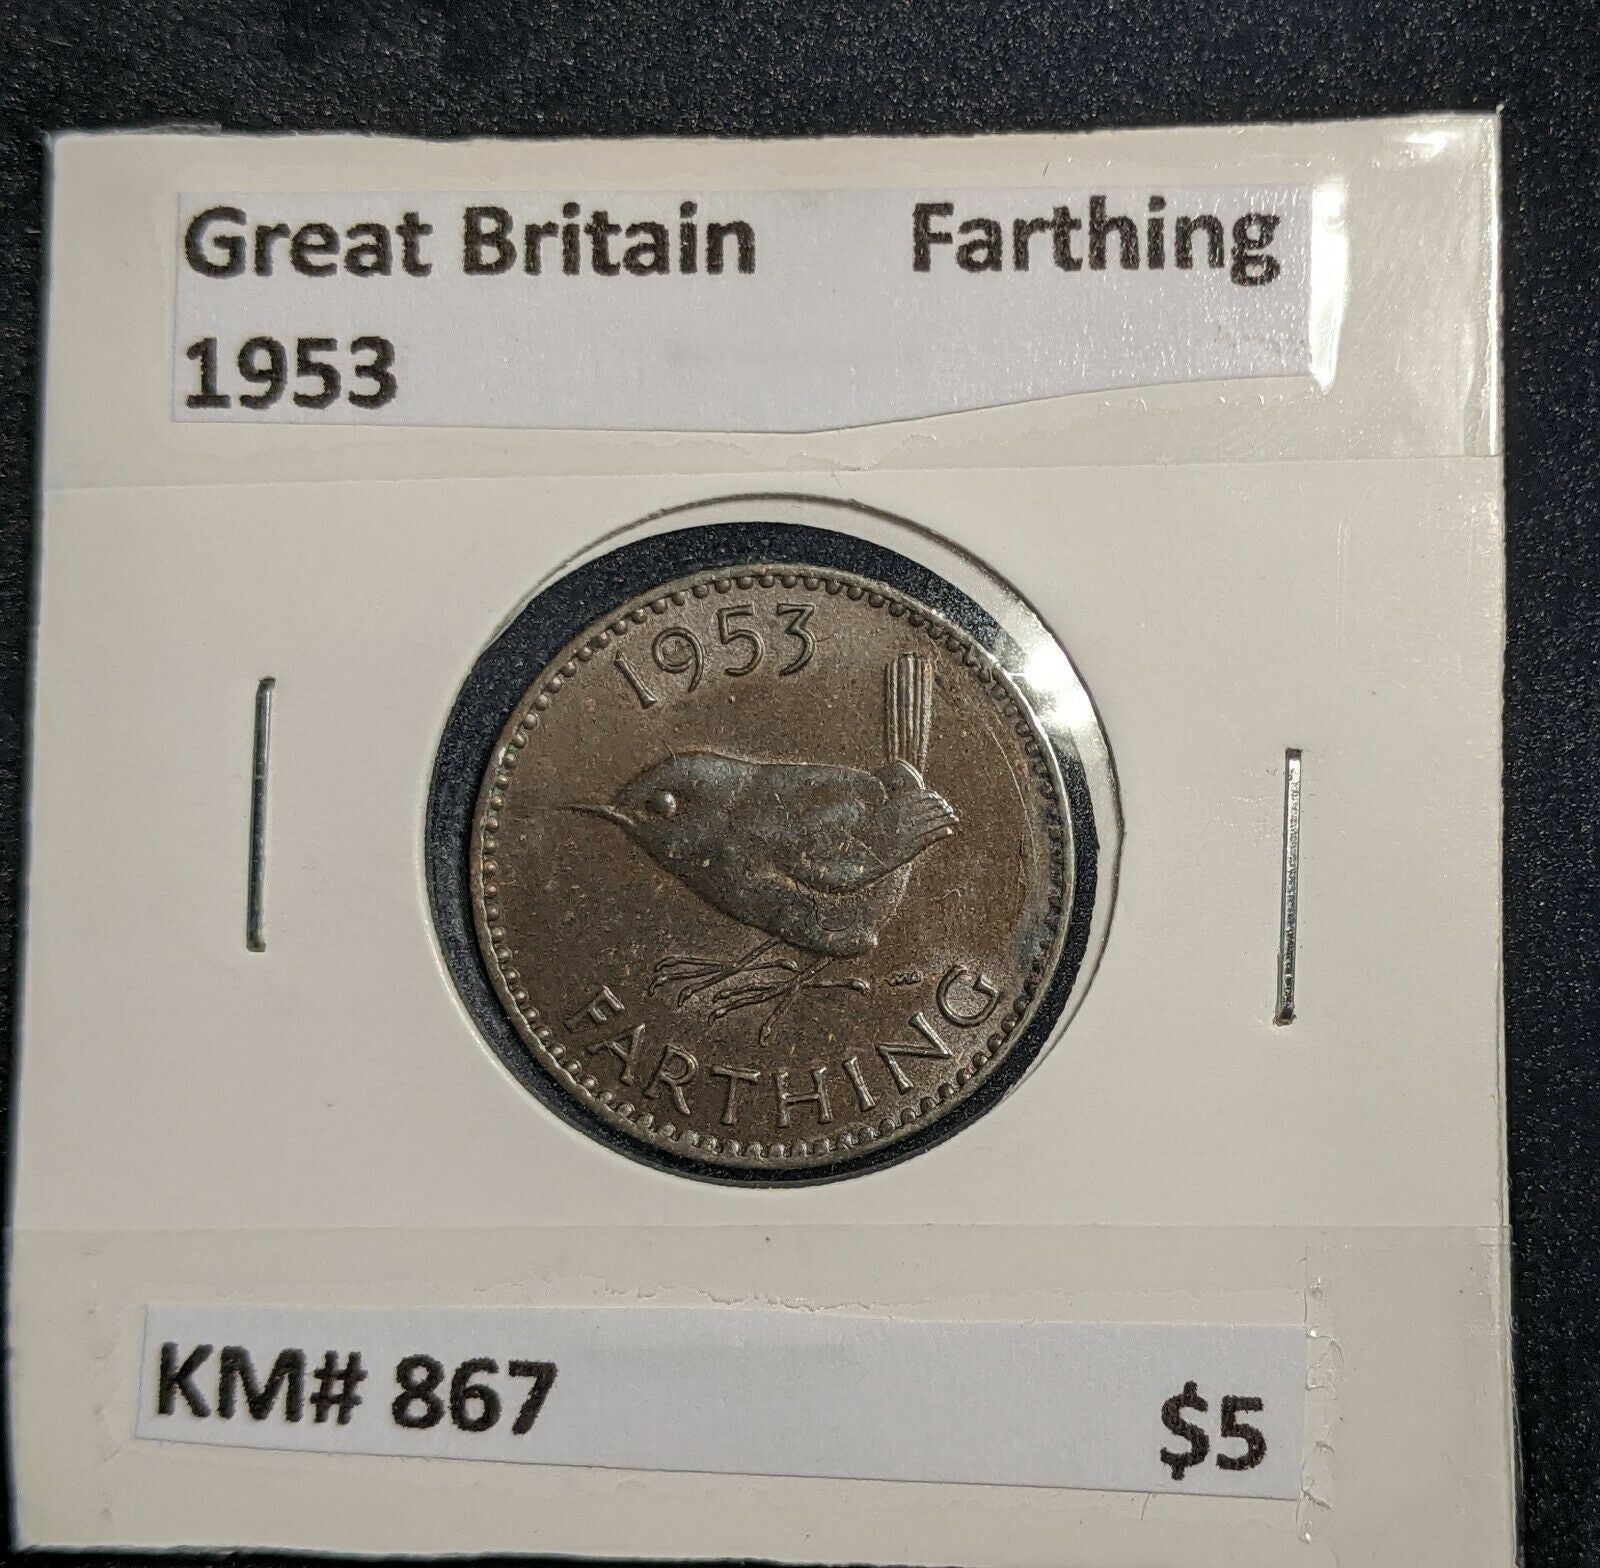 Great Britain 1953 1/4d Farthing KM# 867    #301   #16A